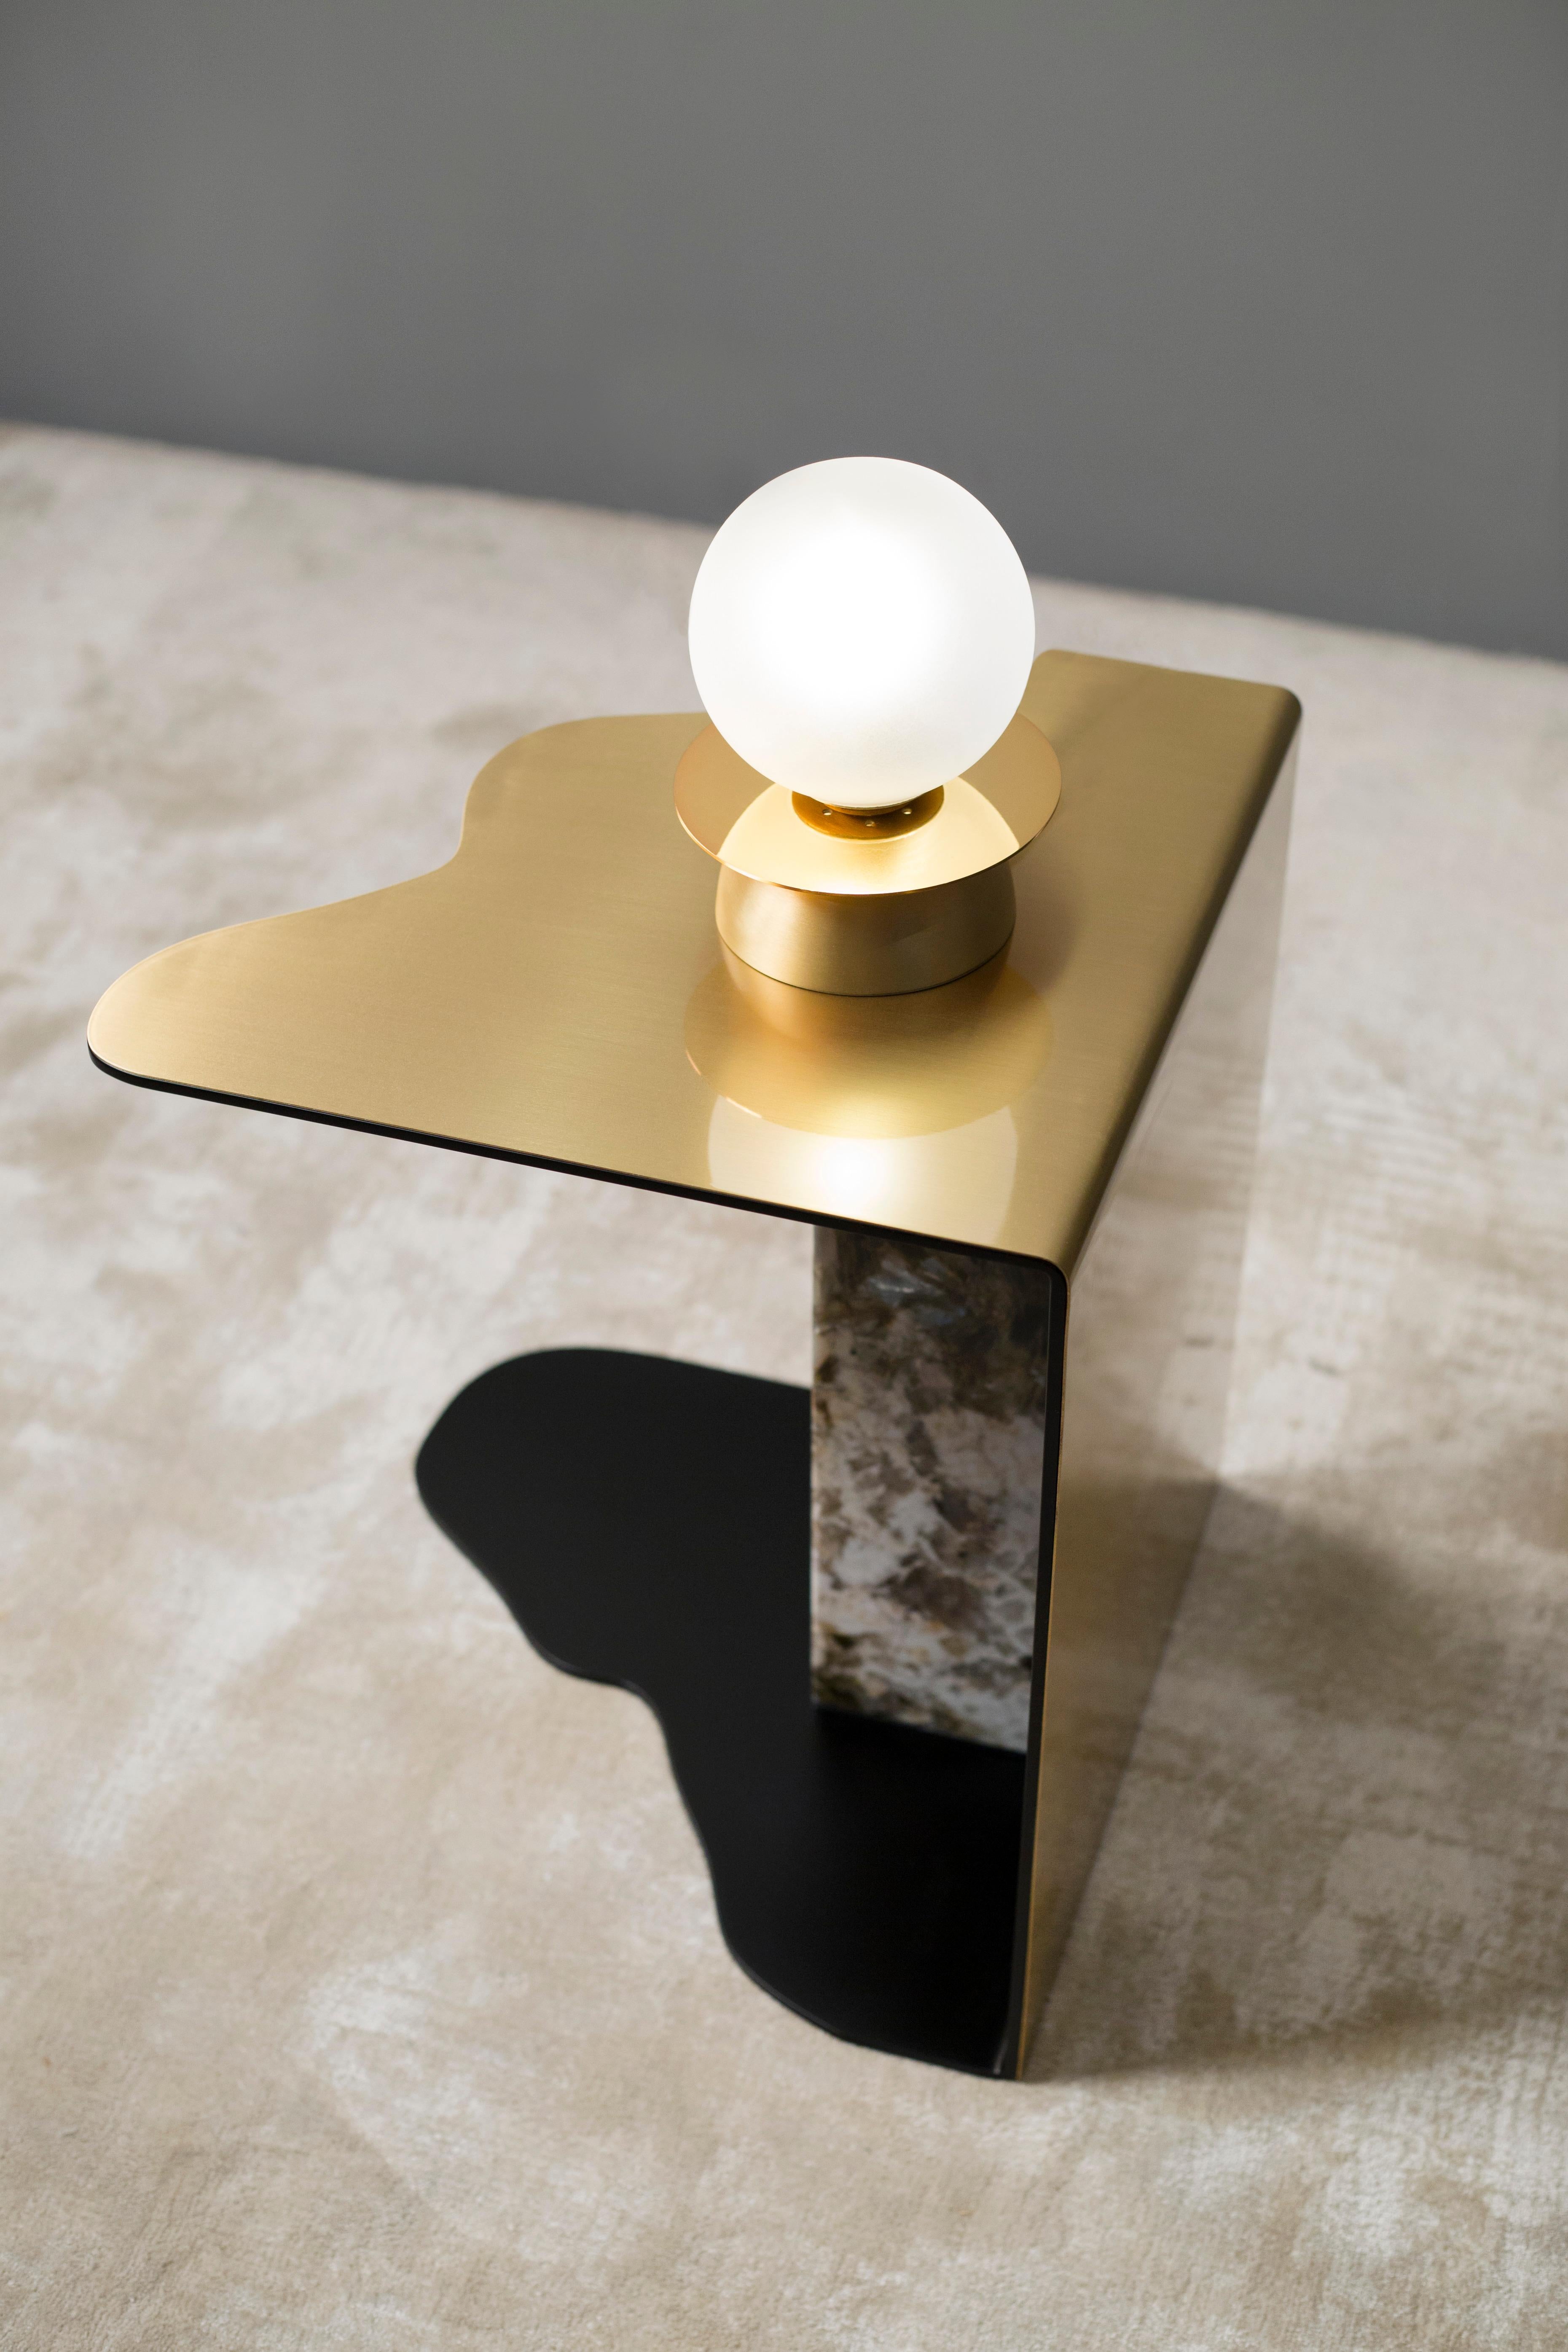 Raw Side Table, Contemporary Collection, Handcrafted in Portugal - Europe by Greenapple.

The interplay of perfectionism and raw beauty allows simplicity to emerge as the ultimate form of sophistication. Raw offers a play of contrasting textures